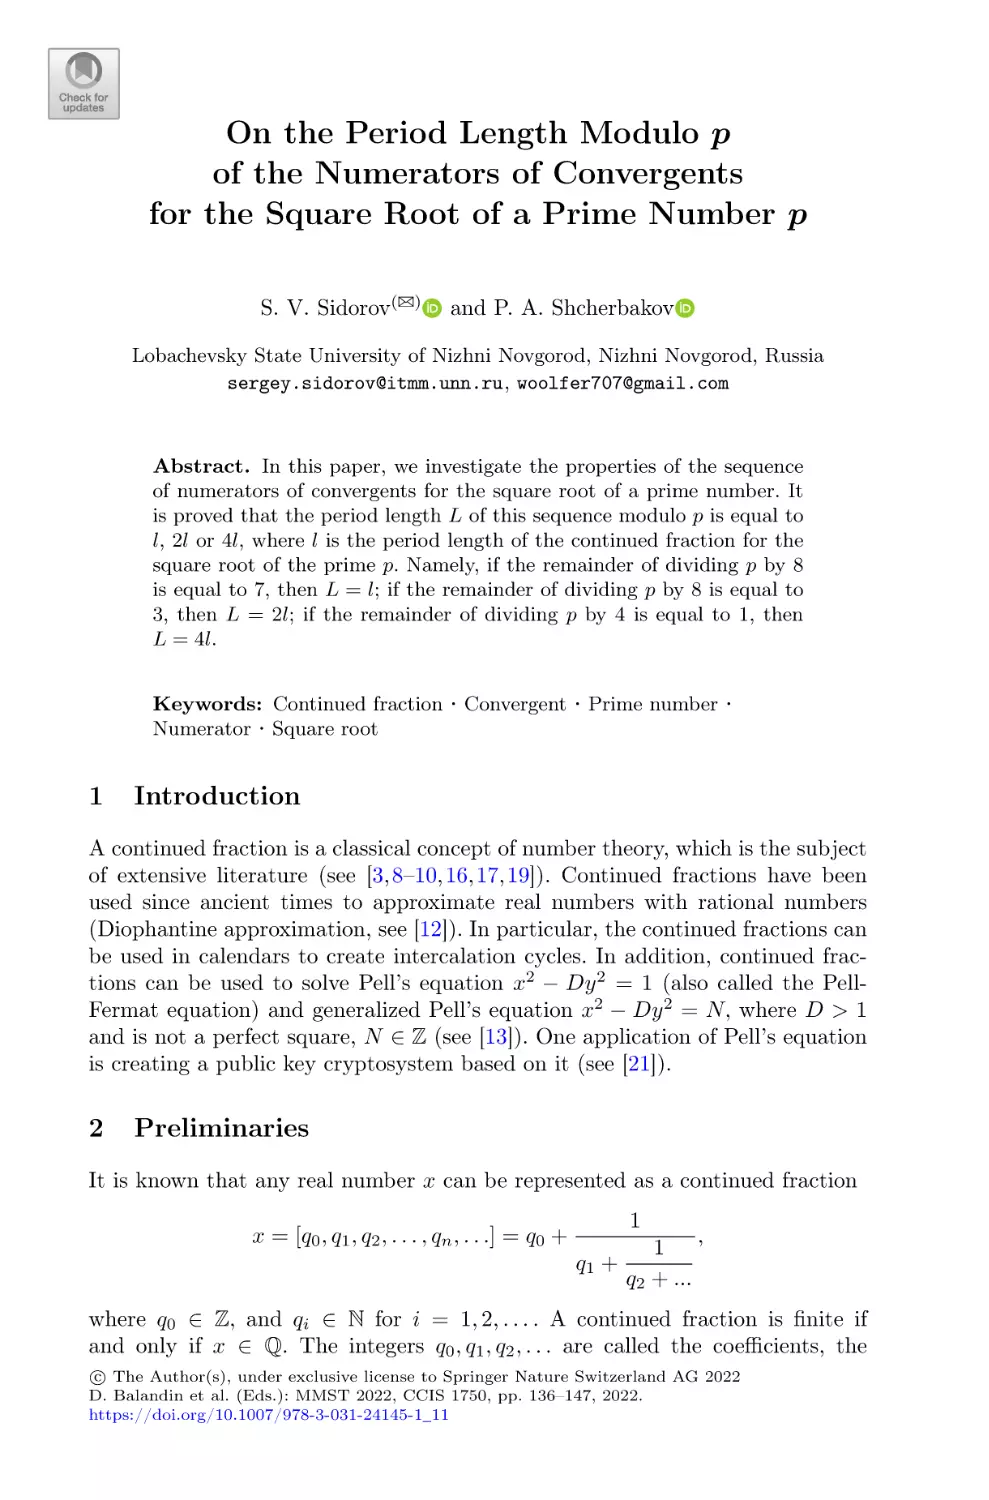 On the Period Length Modulo p of the Numerators of Convergents for the Square Root of a Prime Number p
1 Introduction
2 Preliminaries